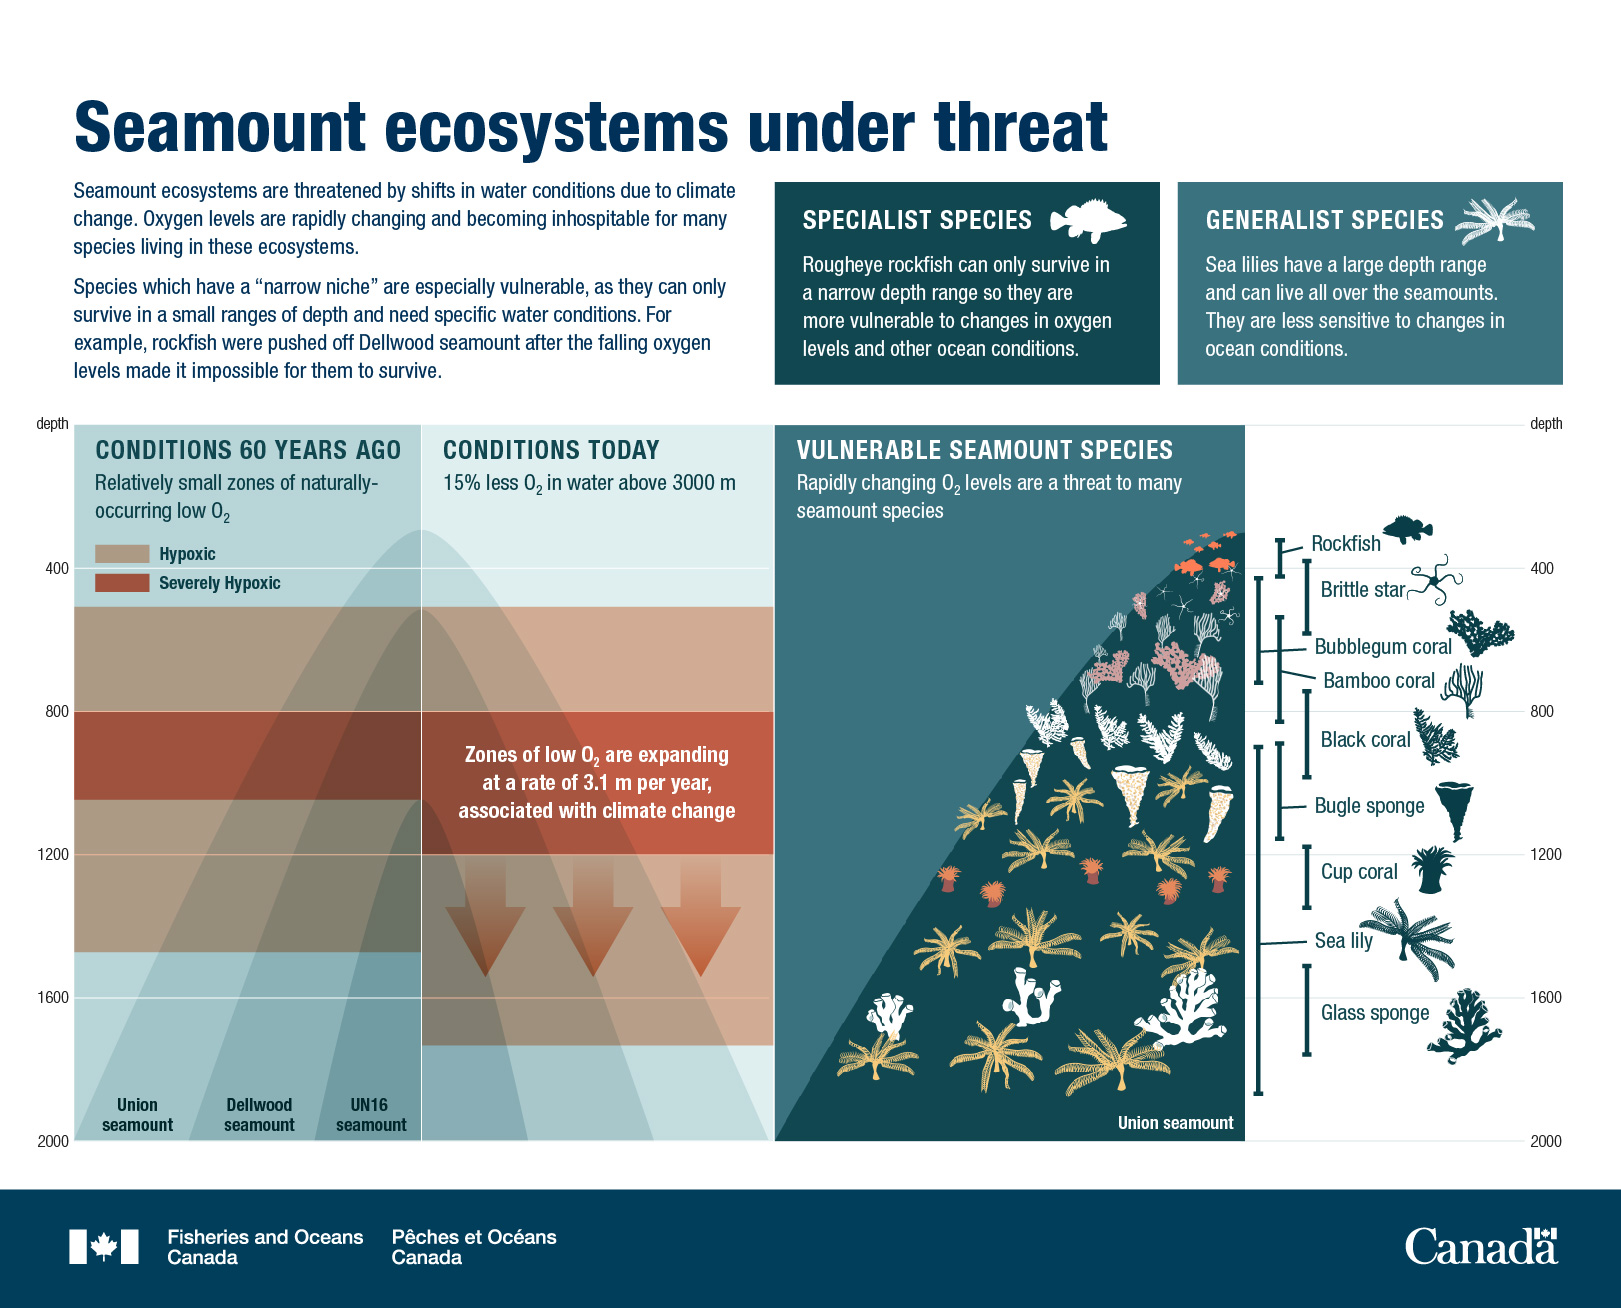 Canada’s Oceans Now, Pacific Ecosystems 2021 - Seamount ecosystems under threat